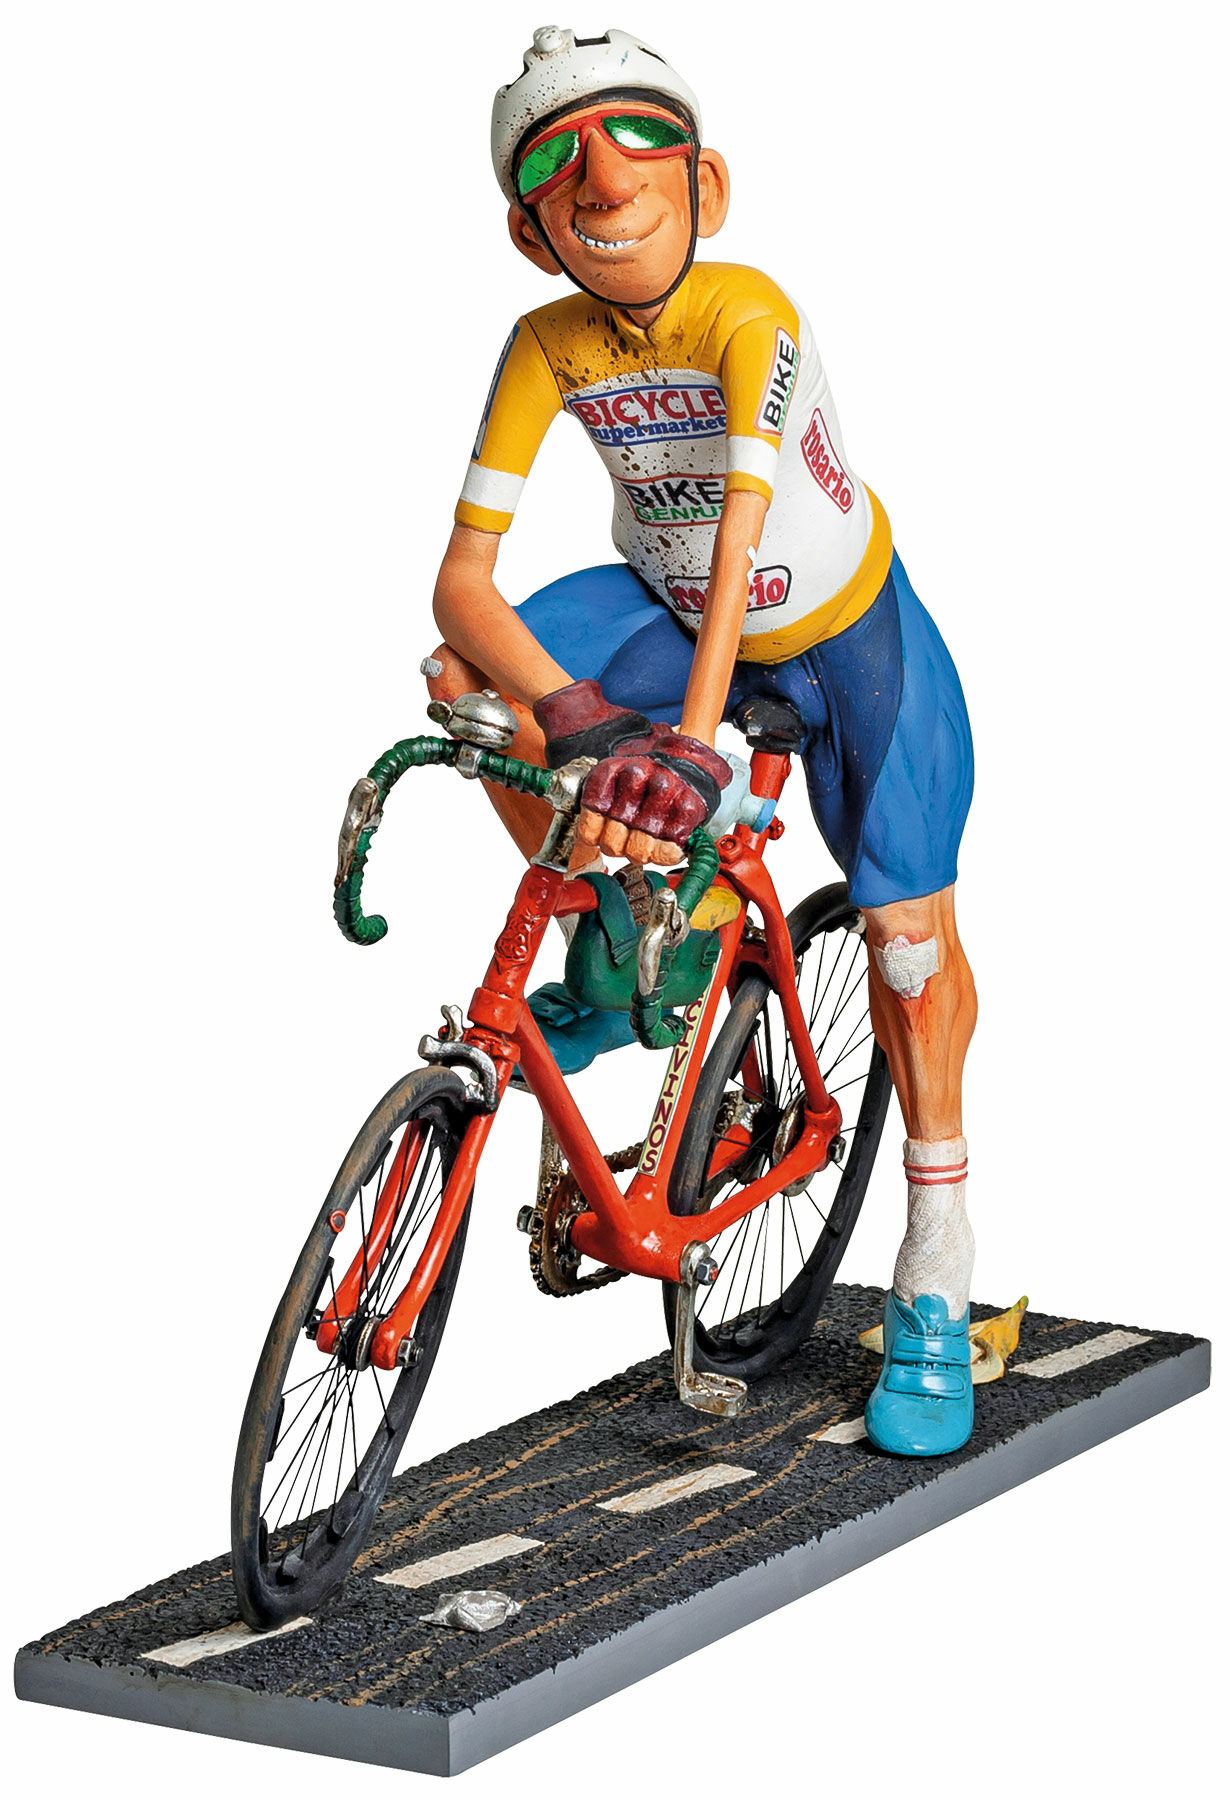 Sportsman caricature "The Cyclist", cast hand-painted by Guillermo Forchino